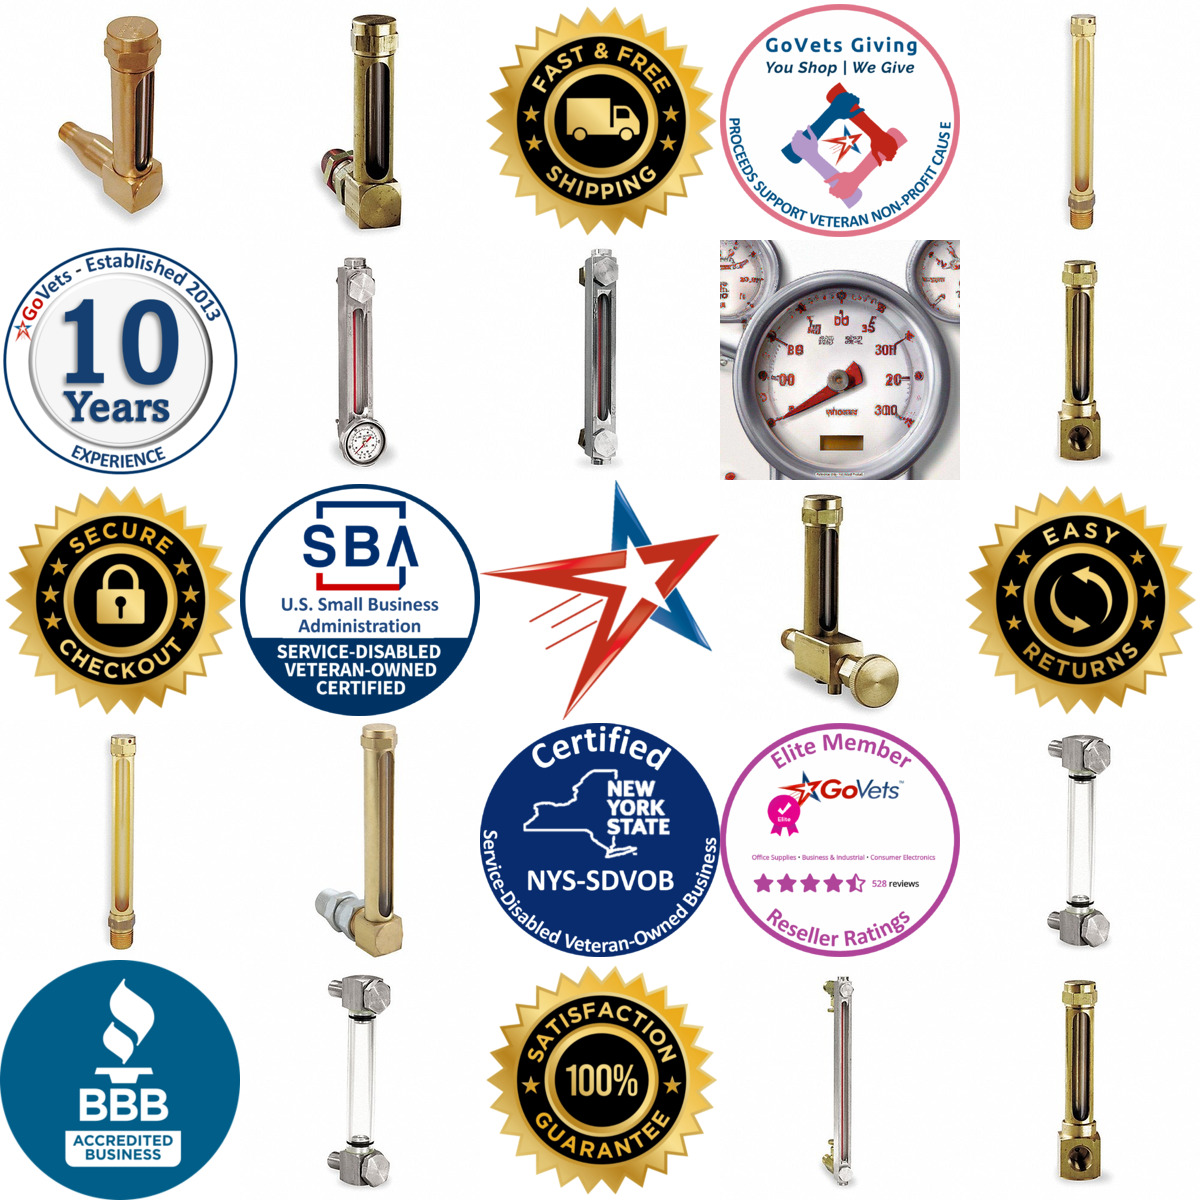 A selection of Level Gauges products on GoVets